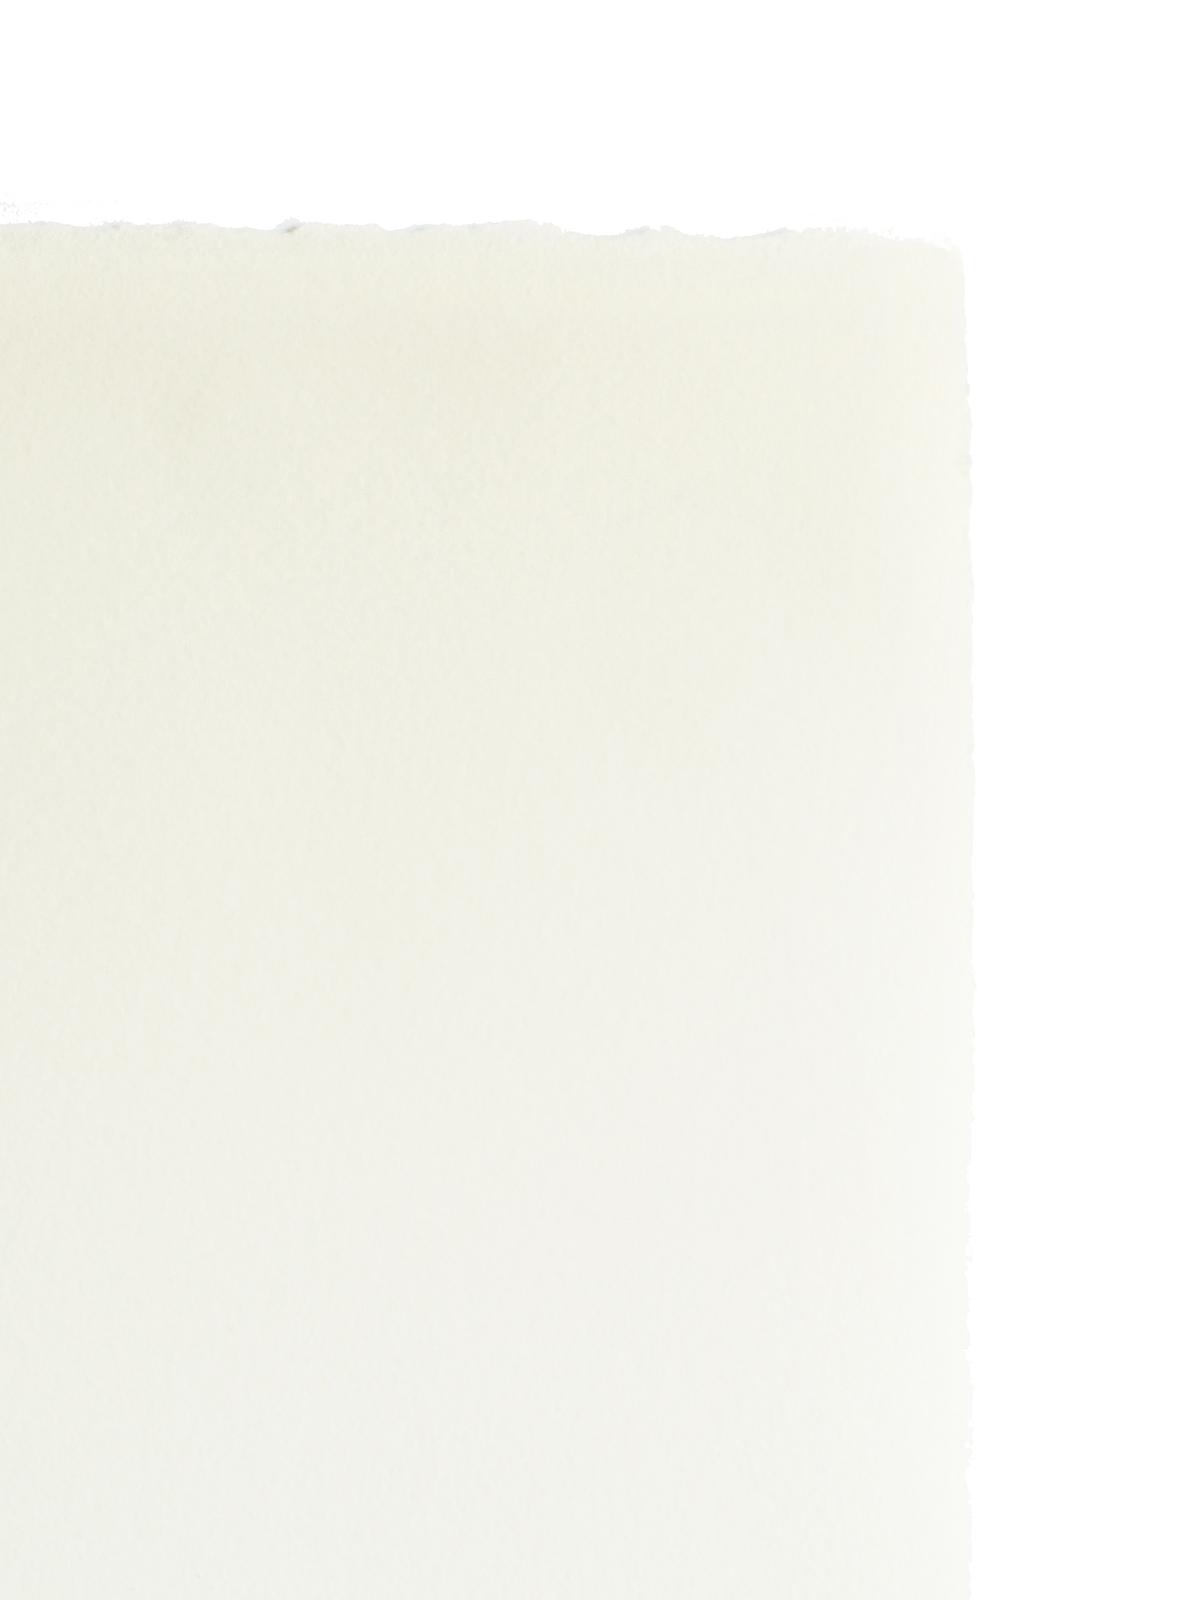 Rives Heavyweight Paper White 19 In. X 26 In. Sheet